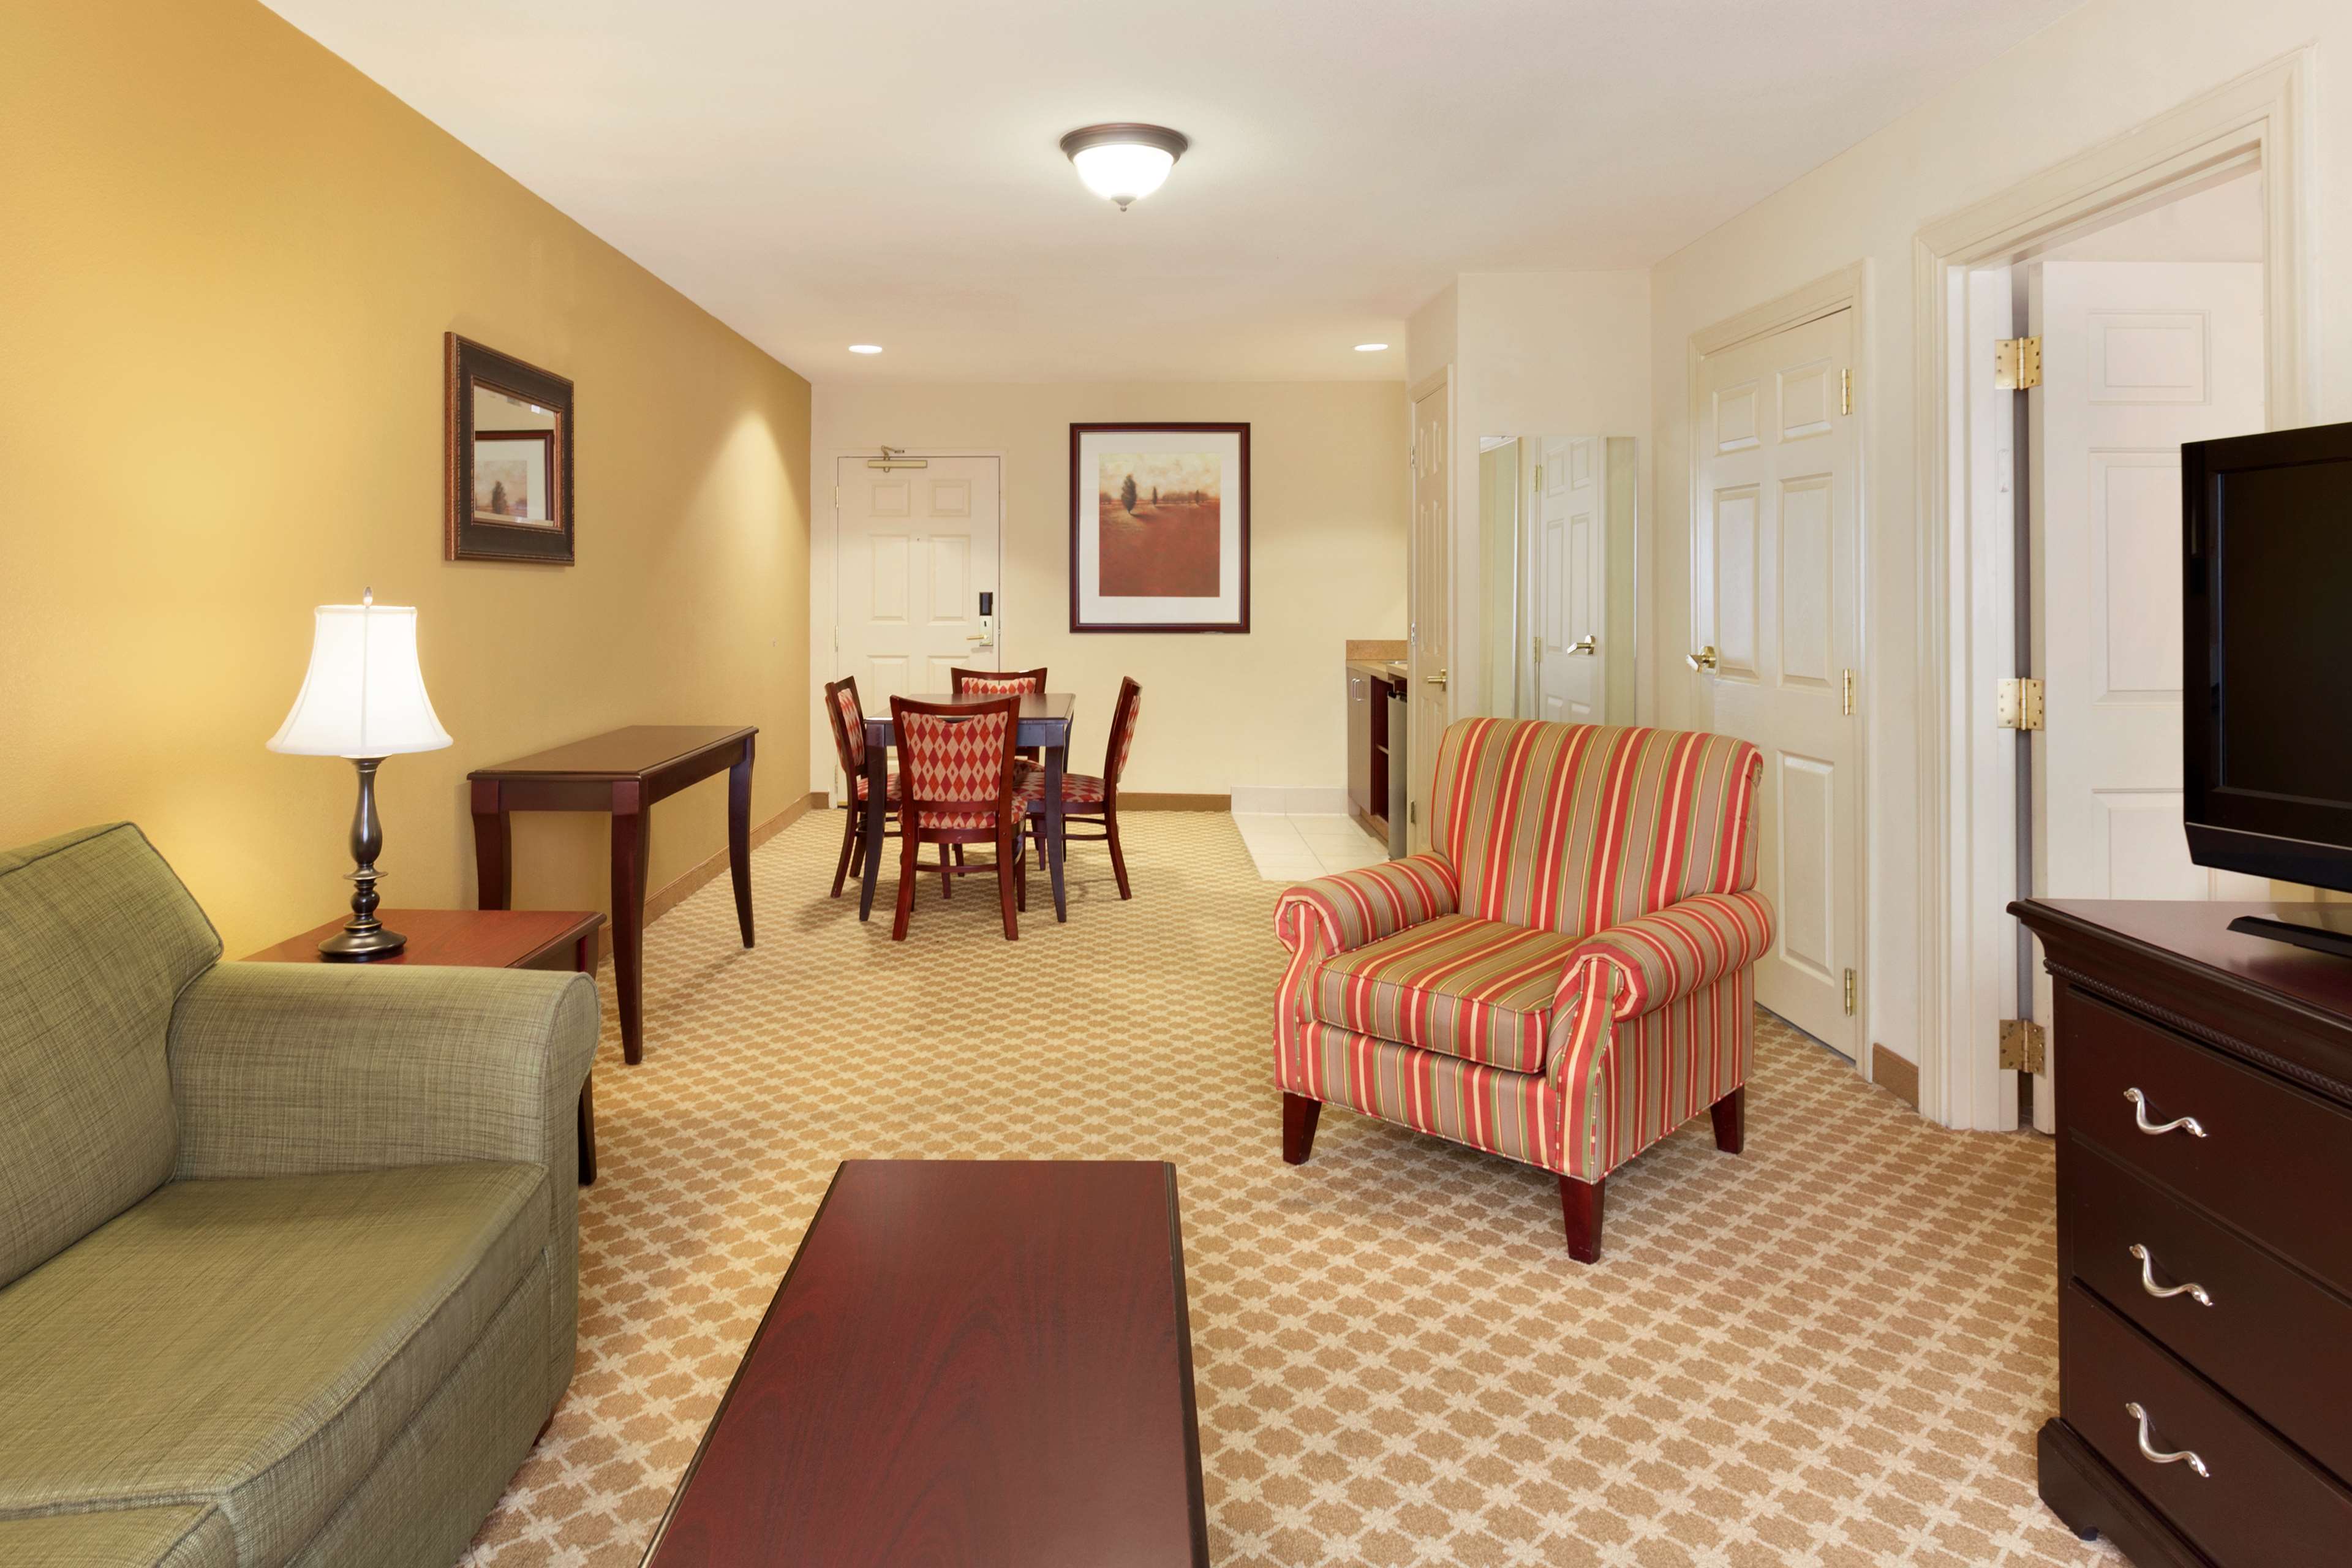 Country Inn & Suites by Radisson, Sumter, SC Photo